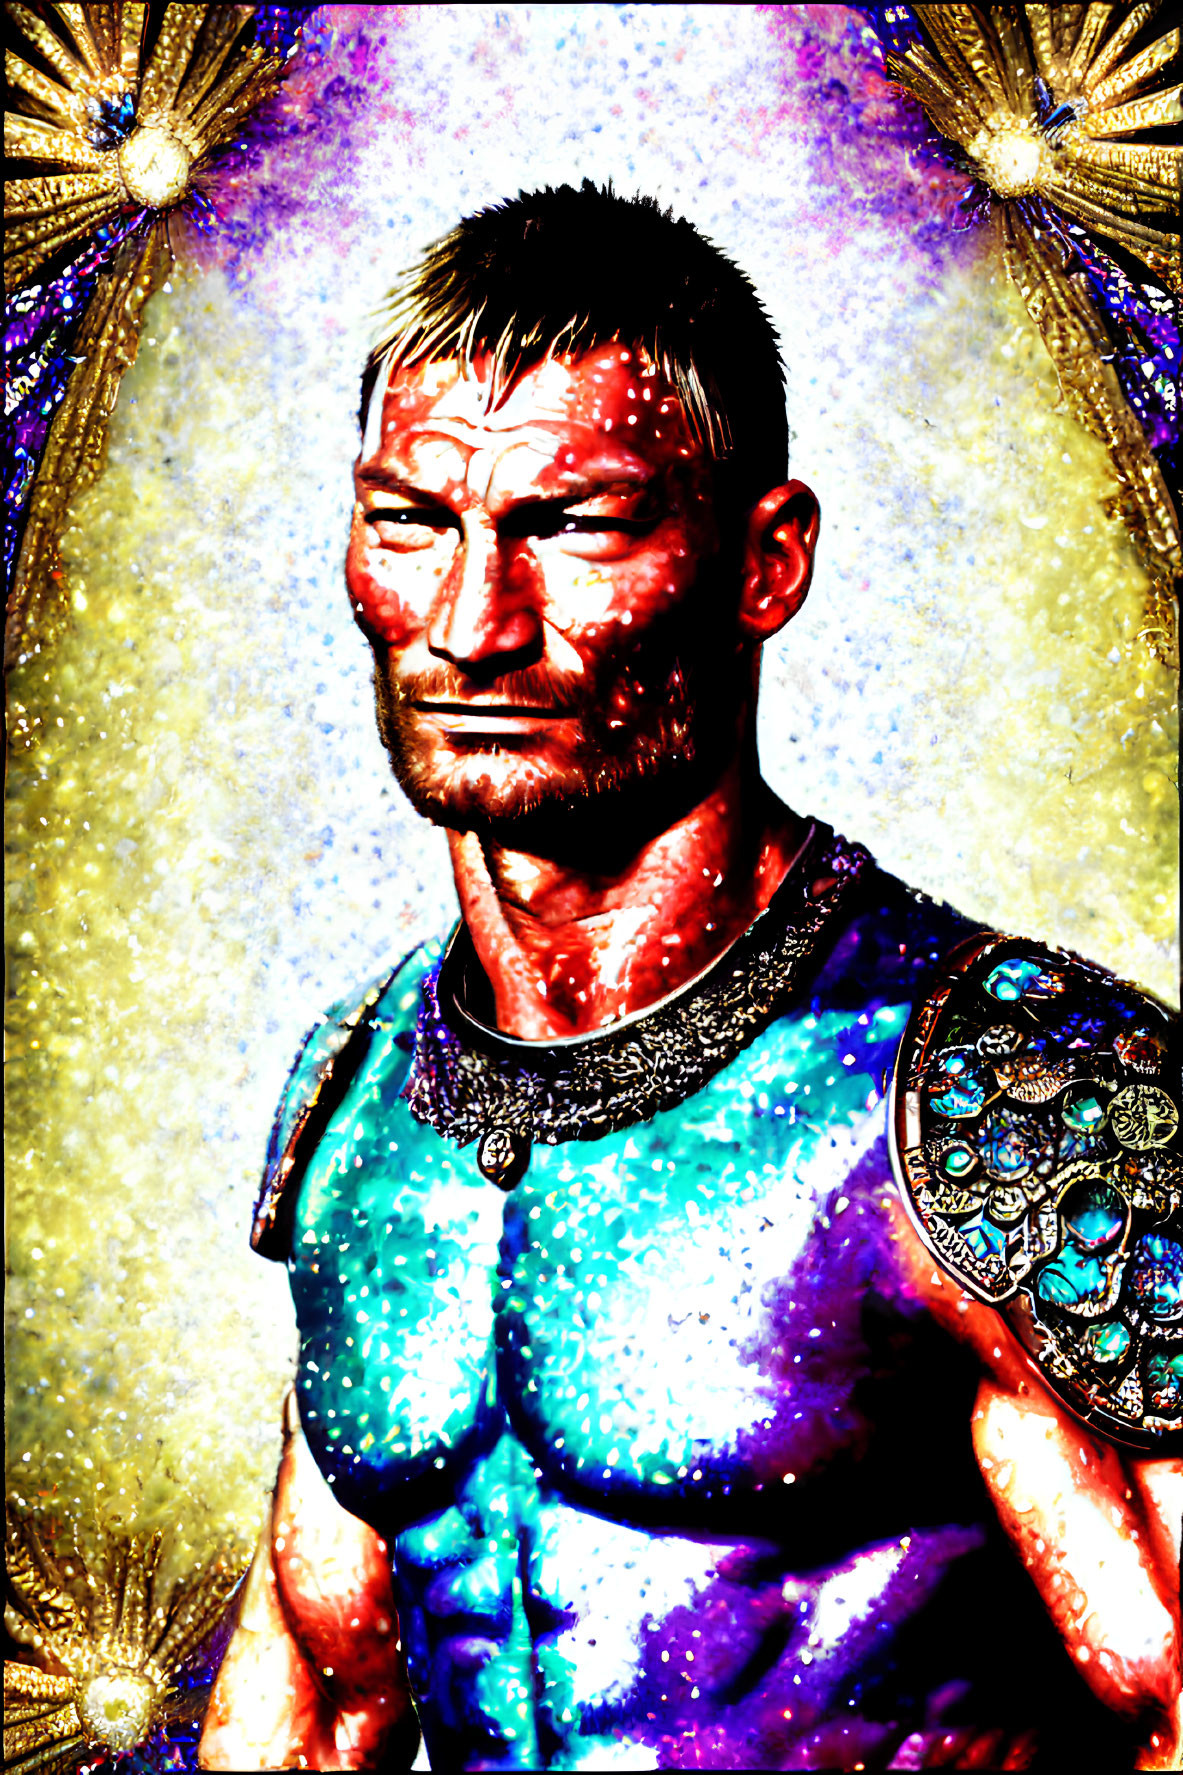 Glittering portrait of a muscular man in blue and purple tunic